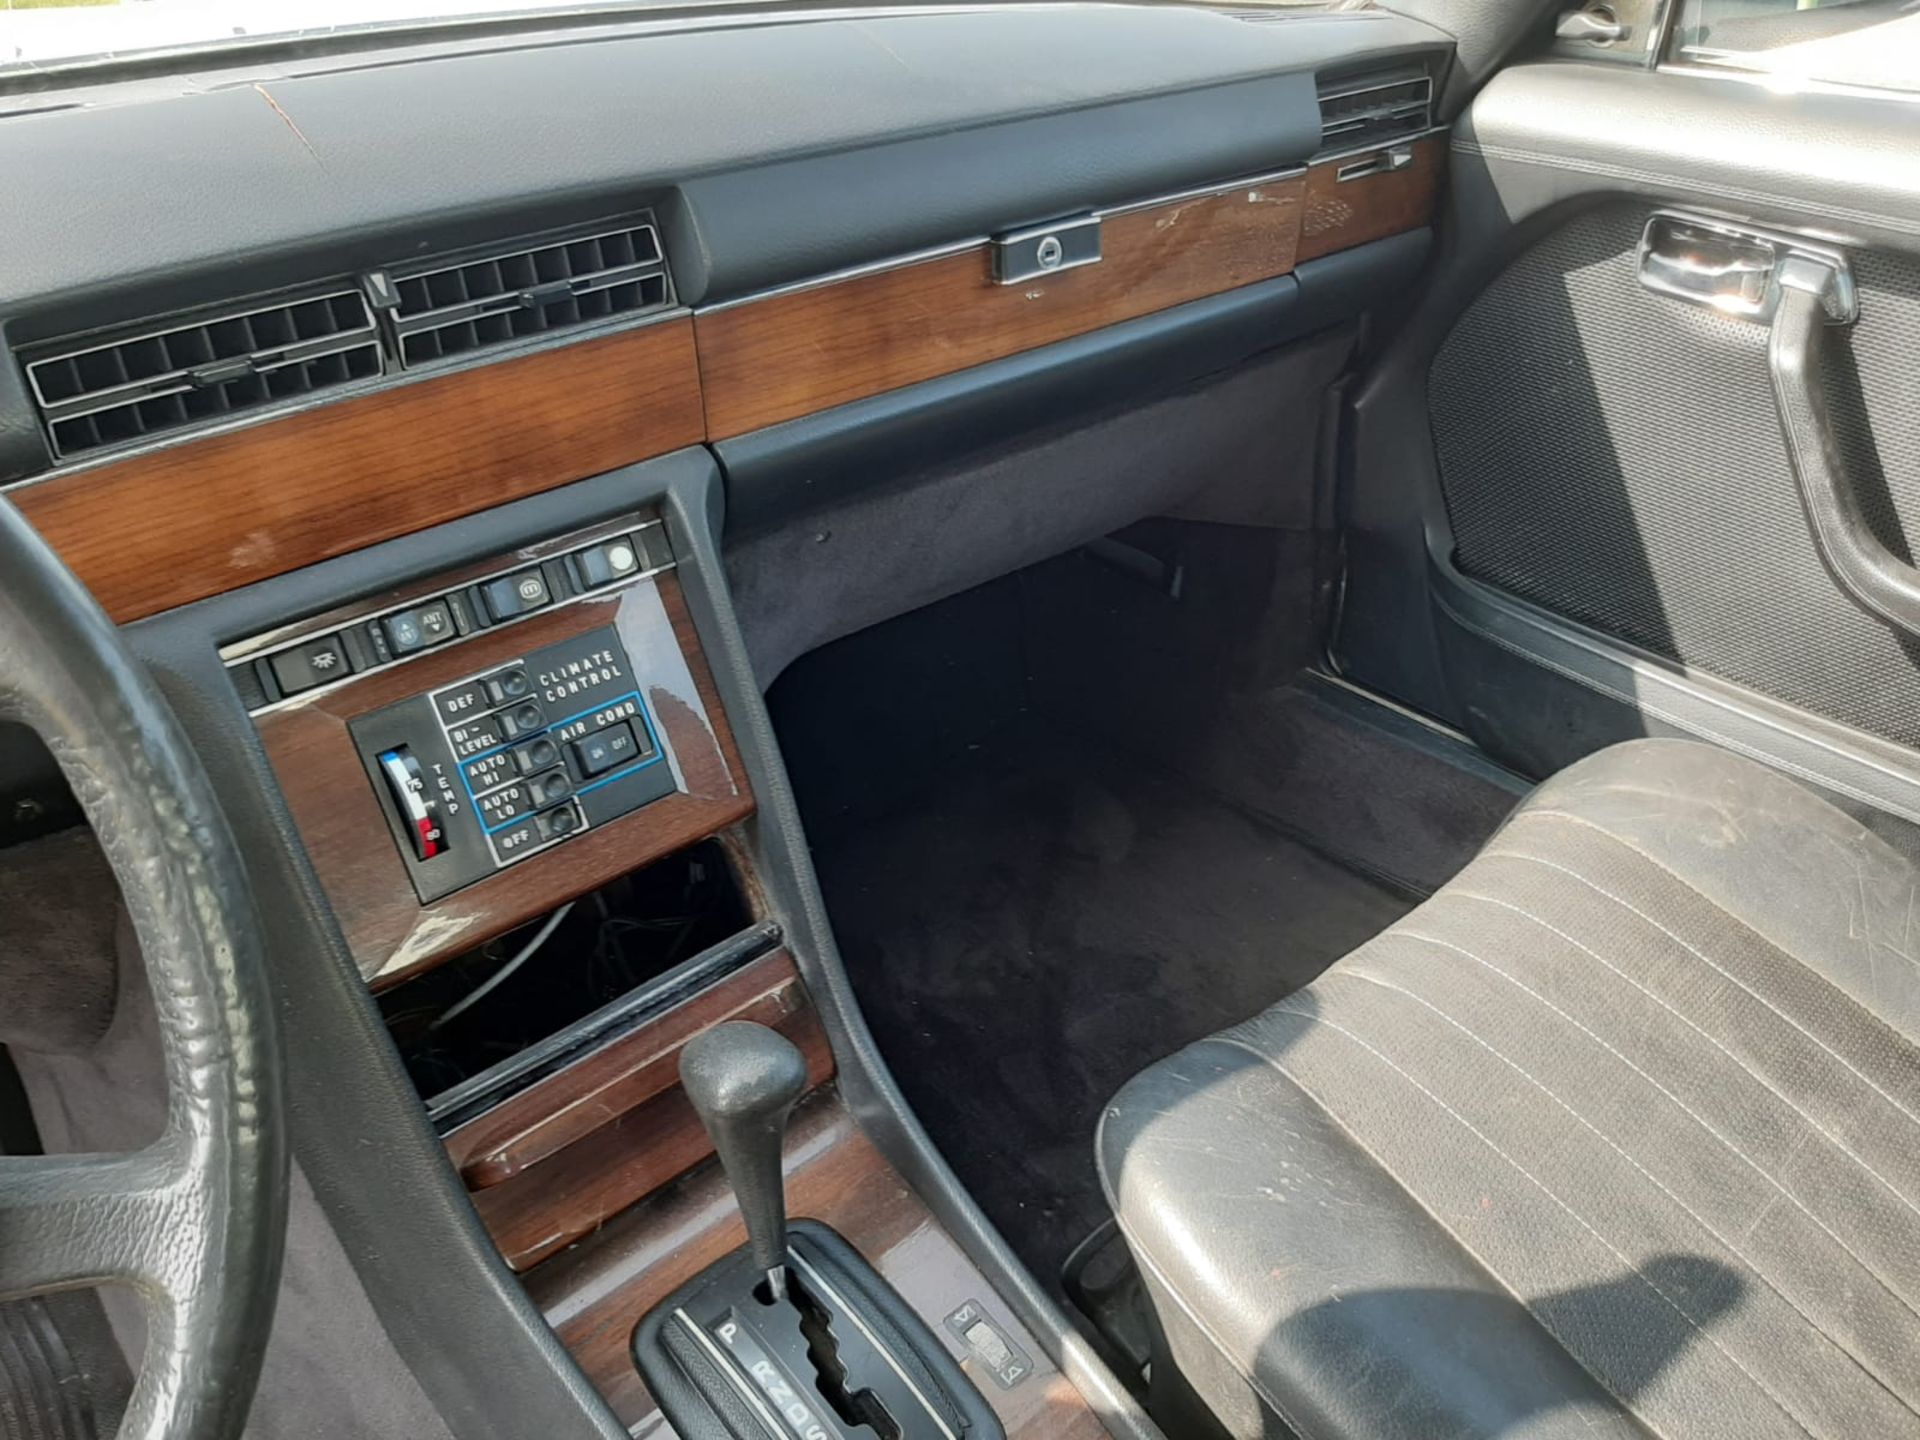 1980 Mercedes 300 SD Turbo Diesel LHD - Image 20 of 23